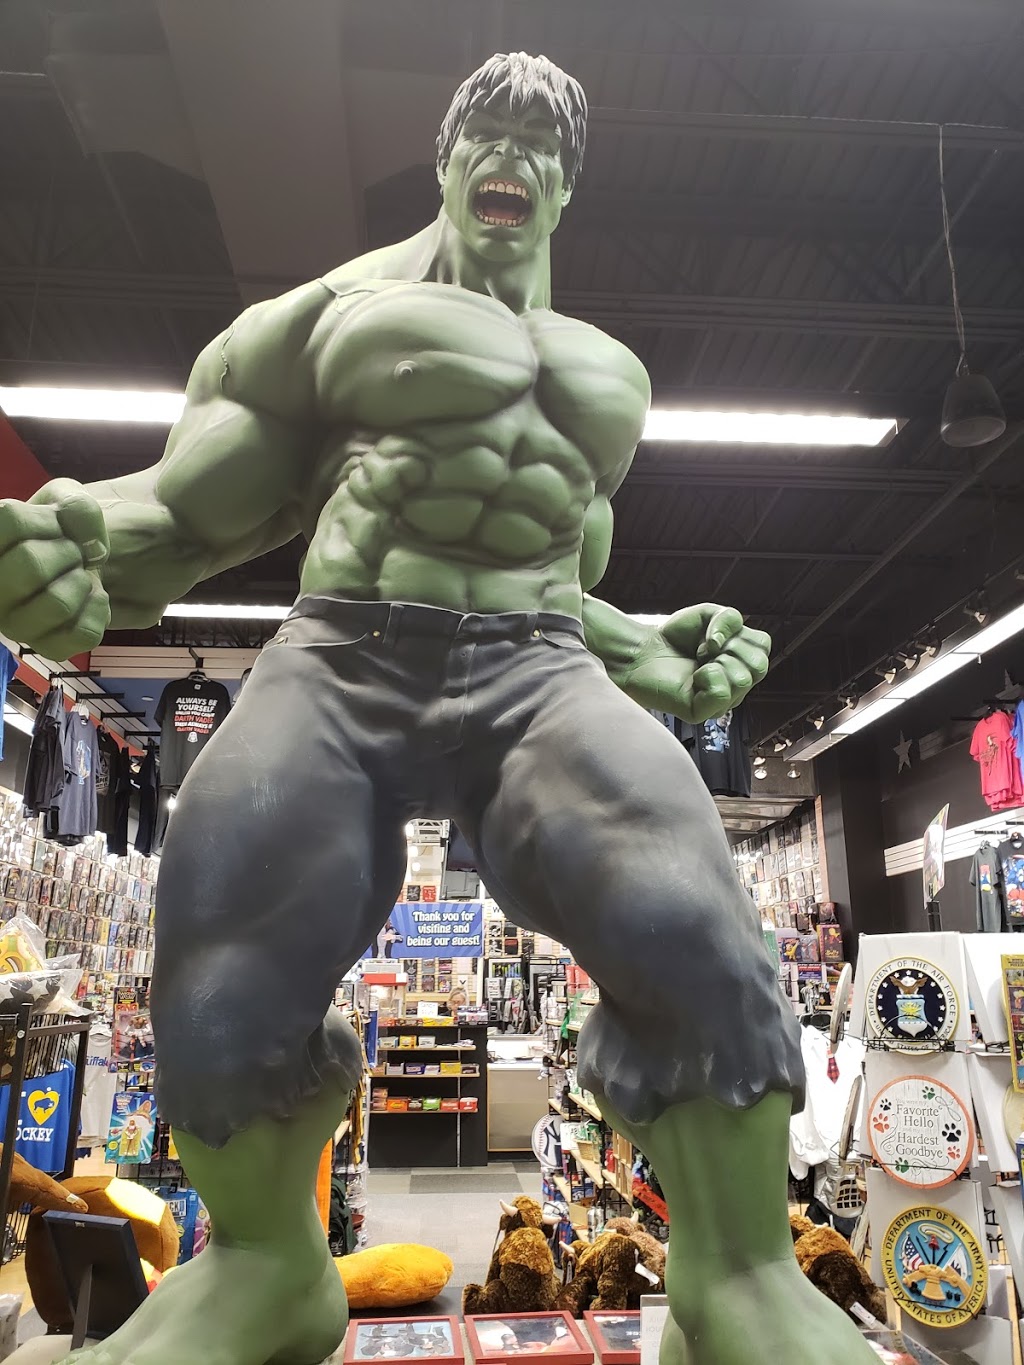 Hollywood Collectibles | store | 3701 McKinley Pkwy #830, Buffalo, NY 14219, USA | 7168280139 OR +1 716-828-0139